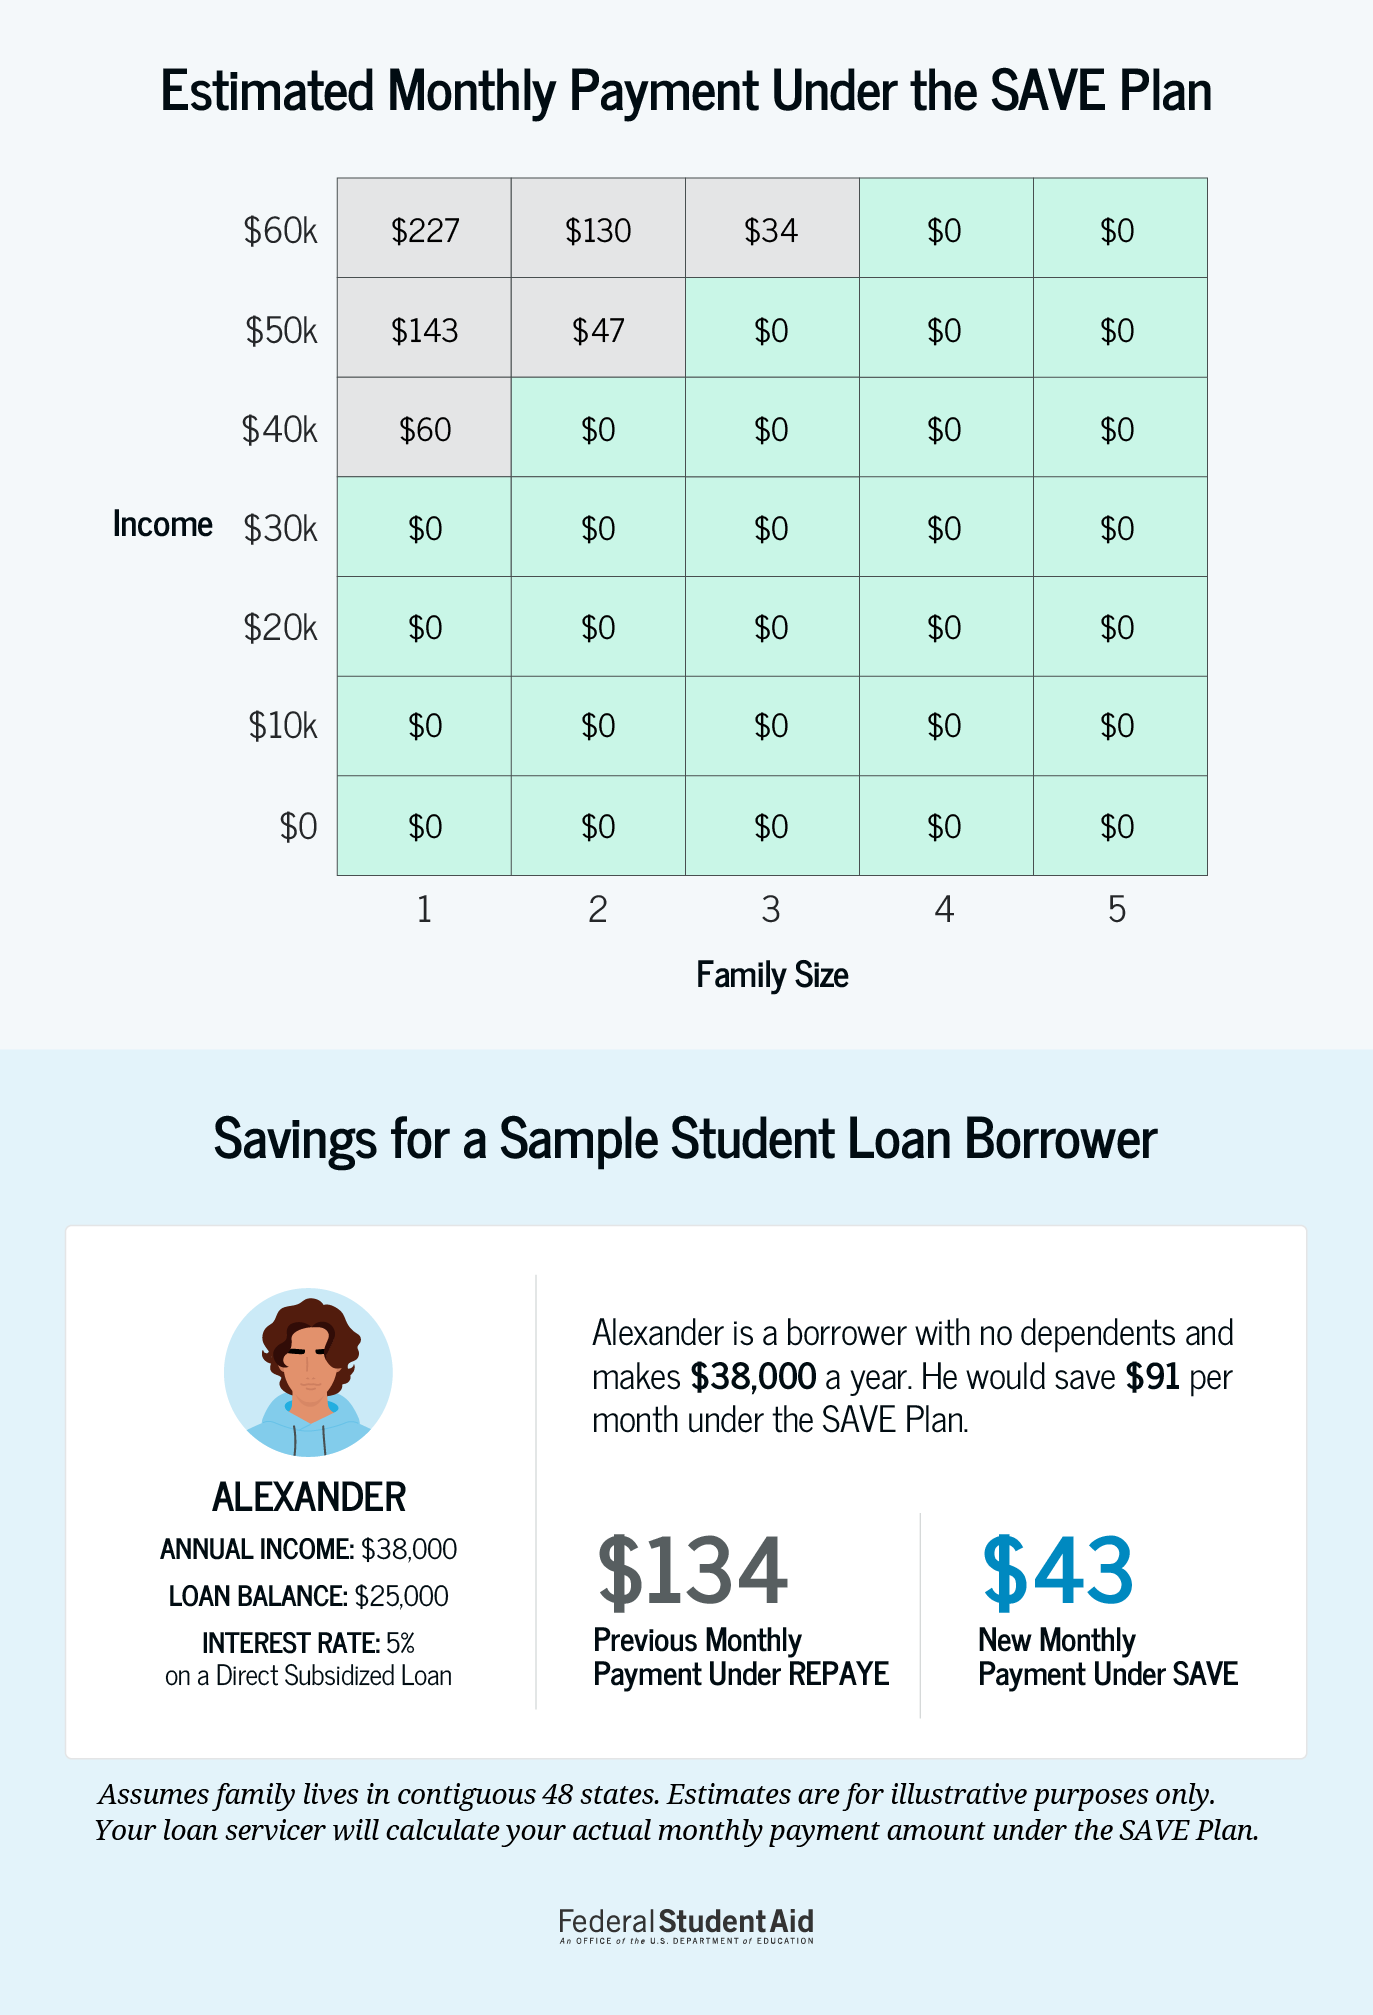 SAVE Plan: How the New Student Loan Repayment Program Works - Credible